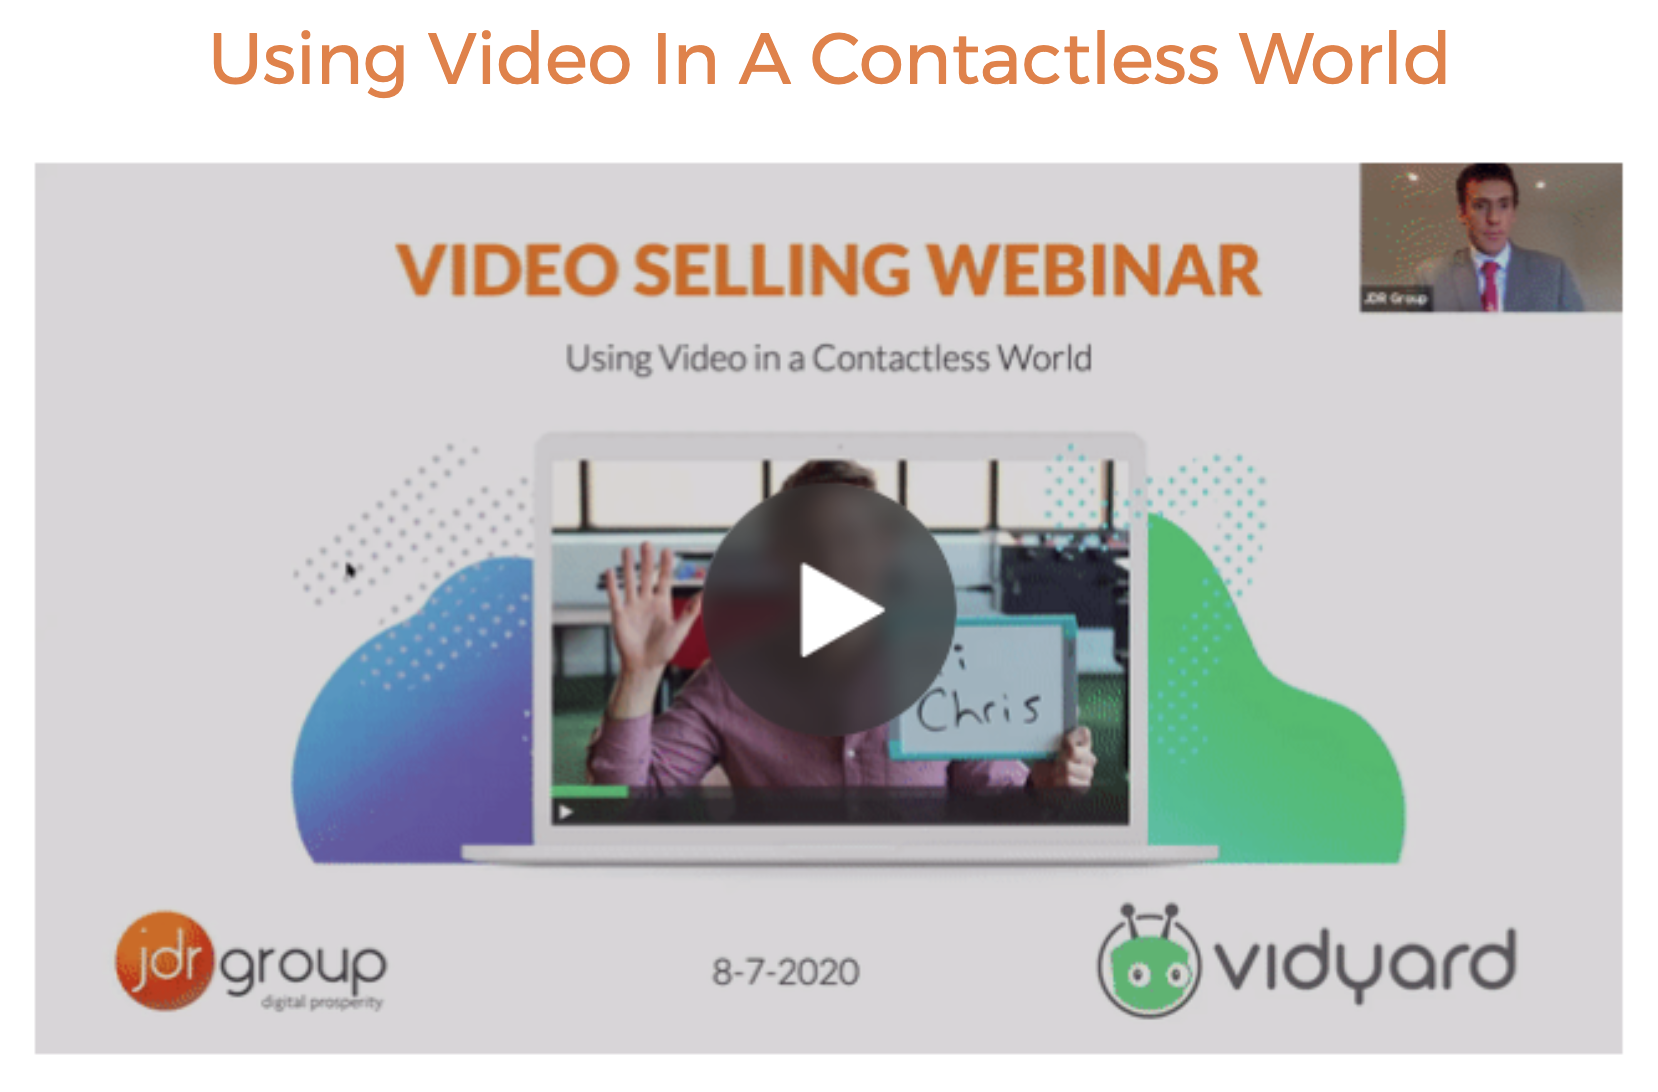 USING VIDEO IN A CONTACTLESS WORLD